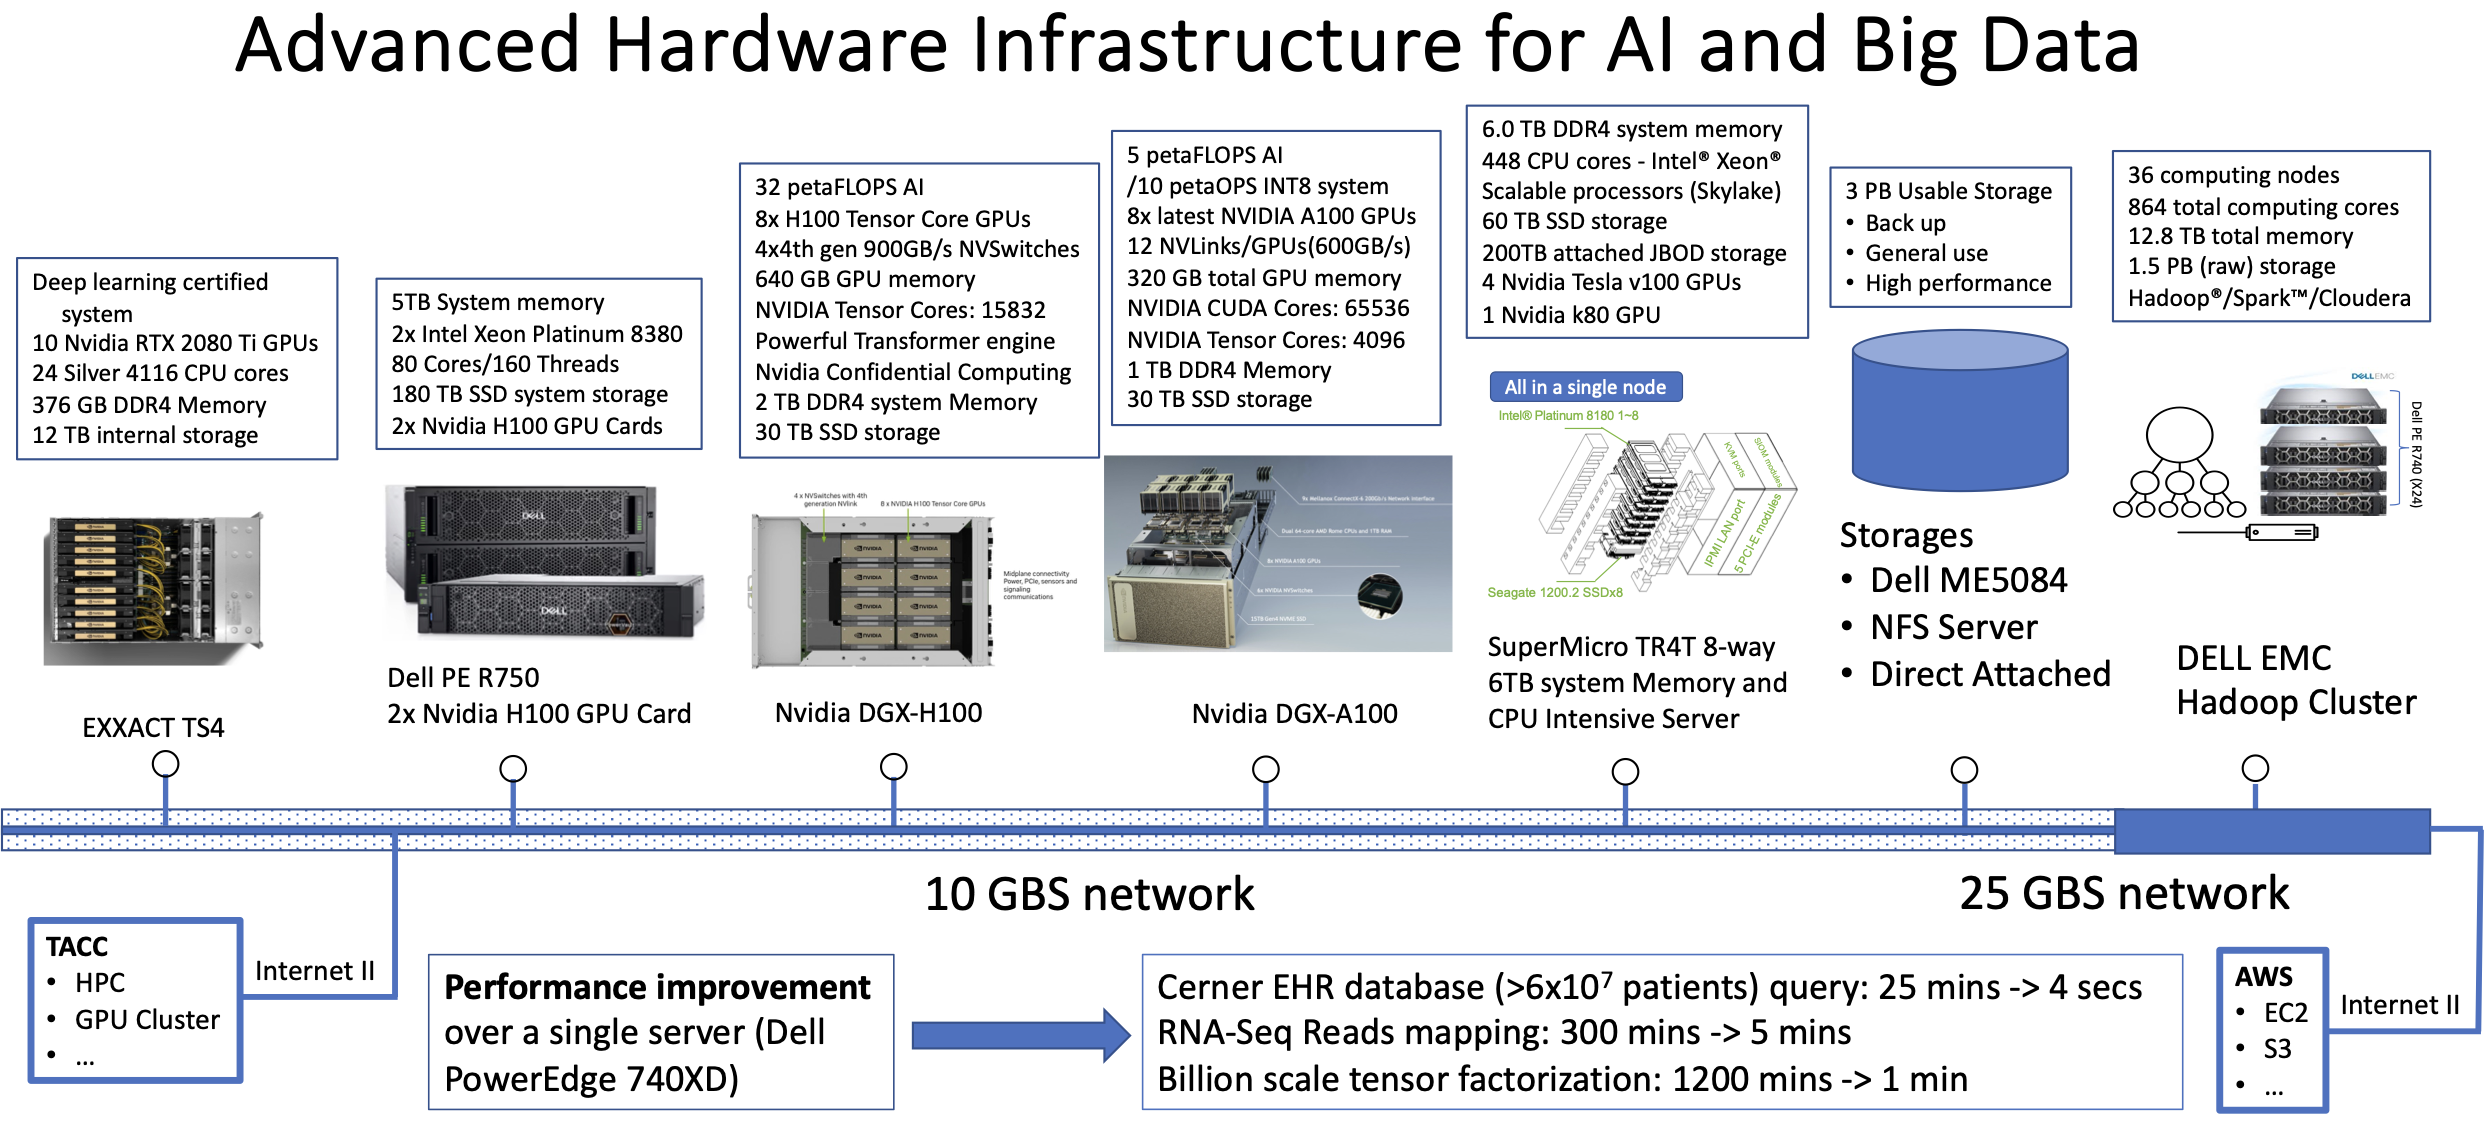 Advanced Hardware Infrastructure for AI and Big Data